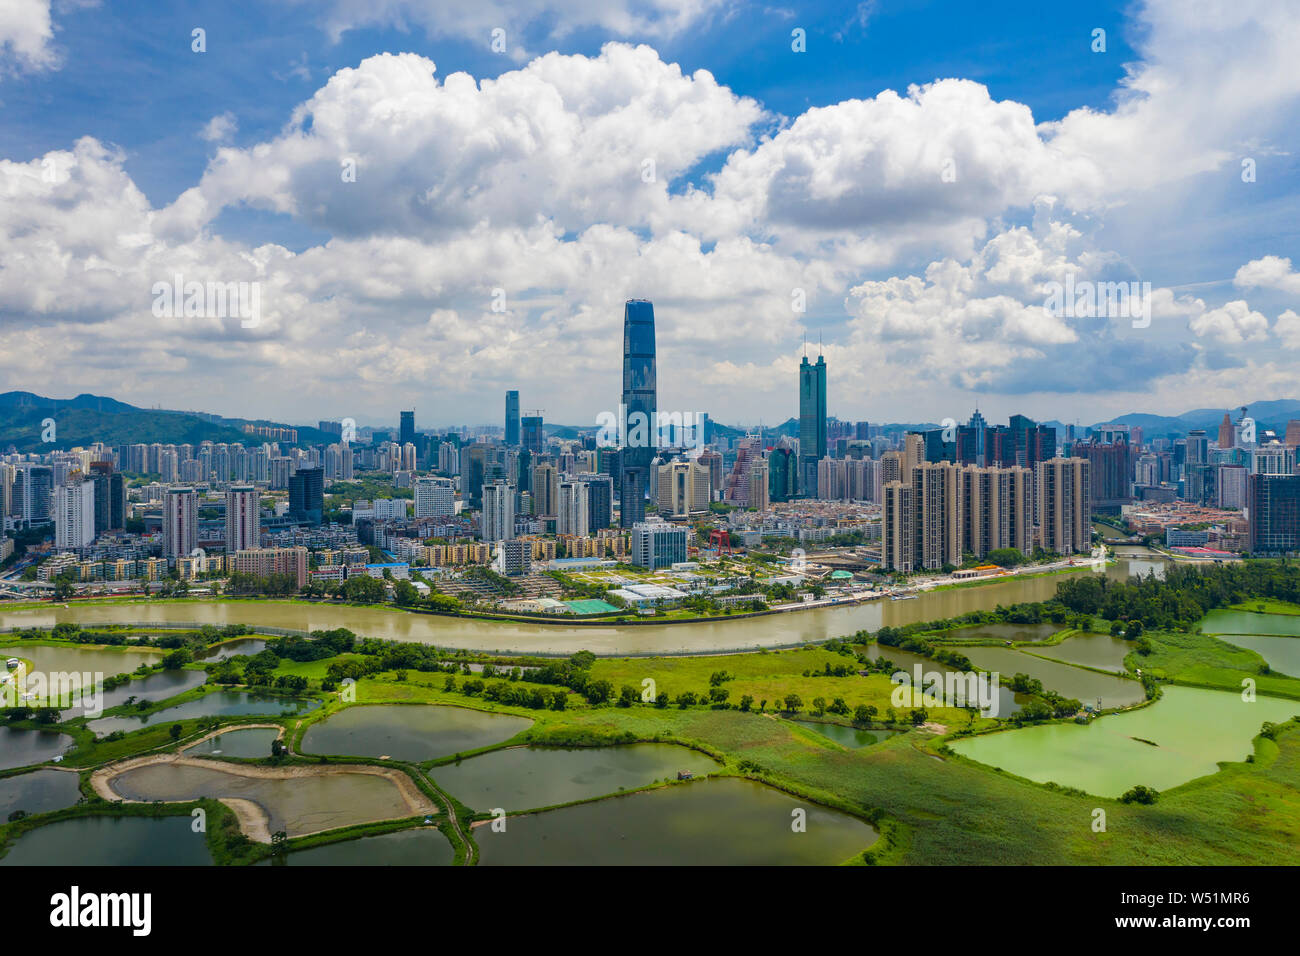 Aerial view of Shenzhen in China Stock Photo